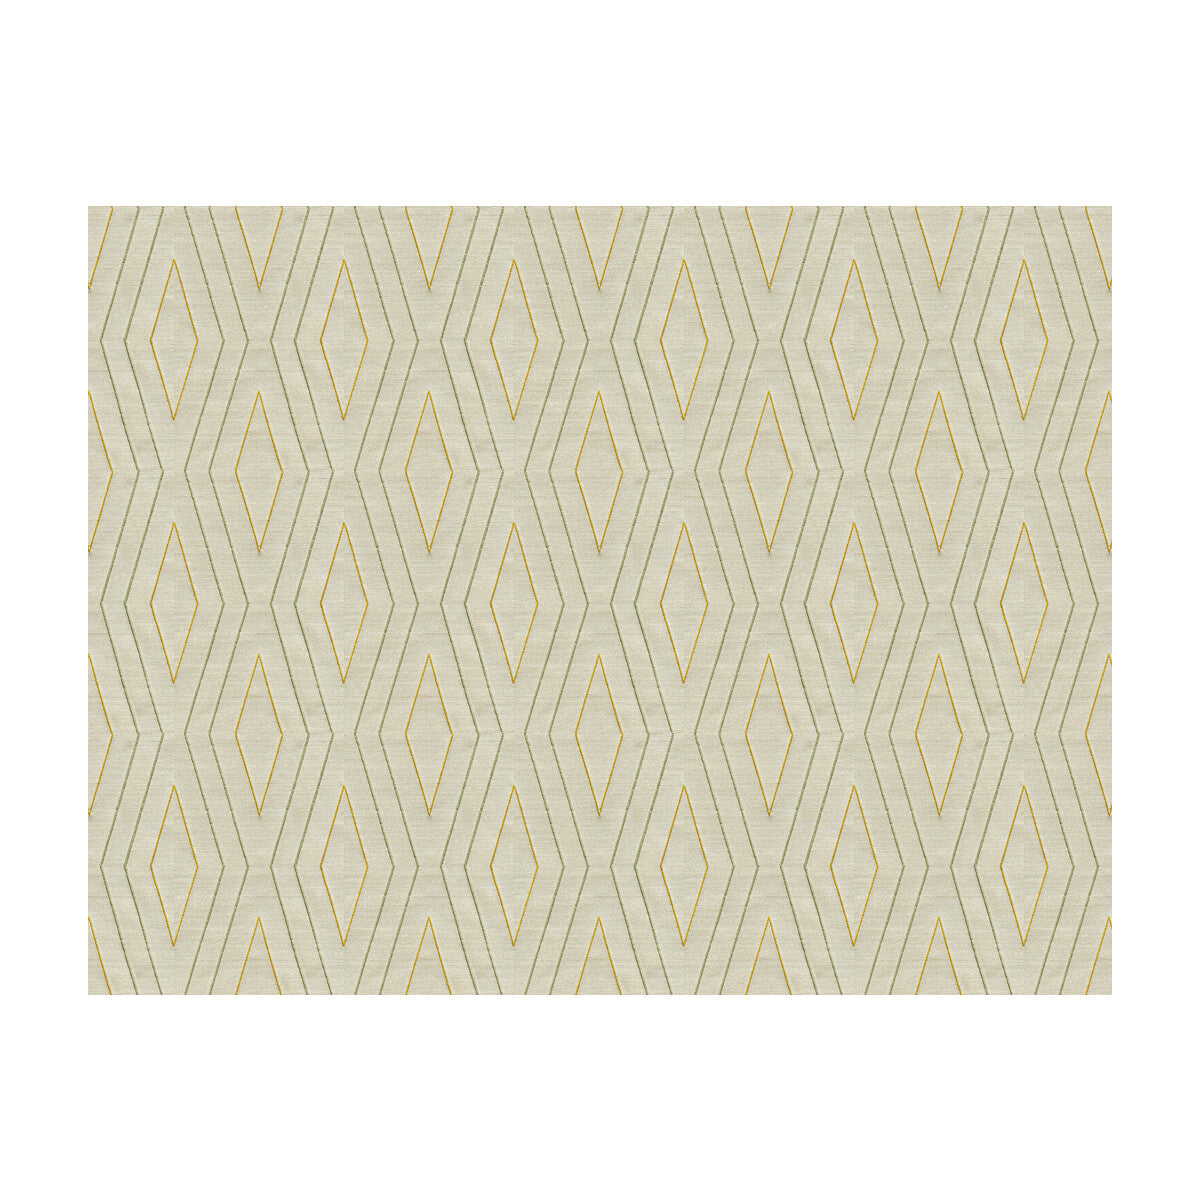 Electra fabric in luminaire color - pattern 33706.130.0 - by Kravet Couture in the Michael Berman II Collection collection